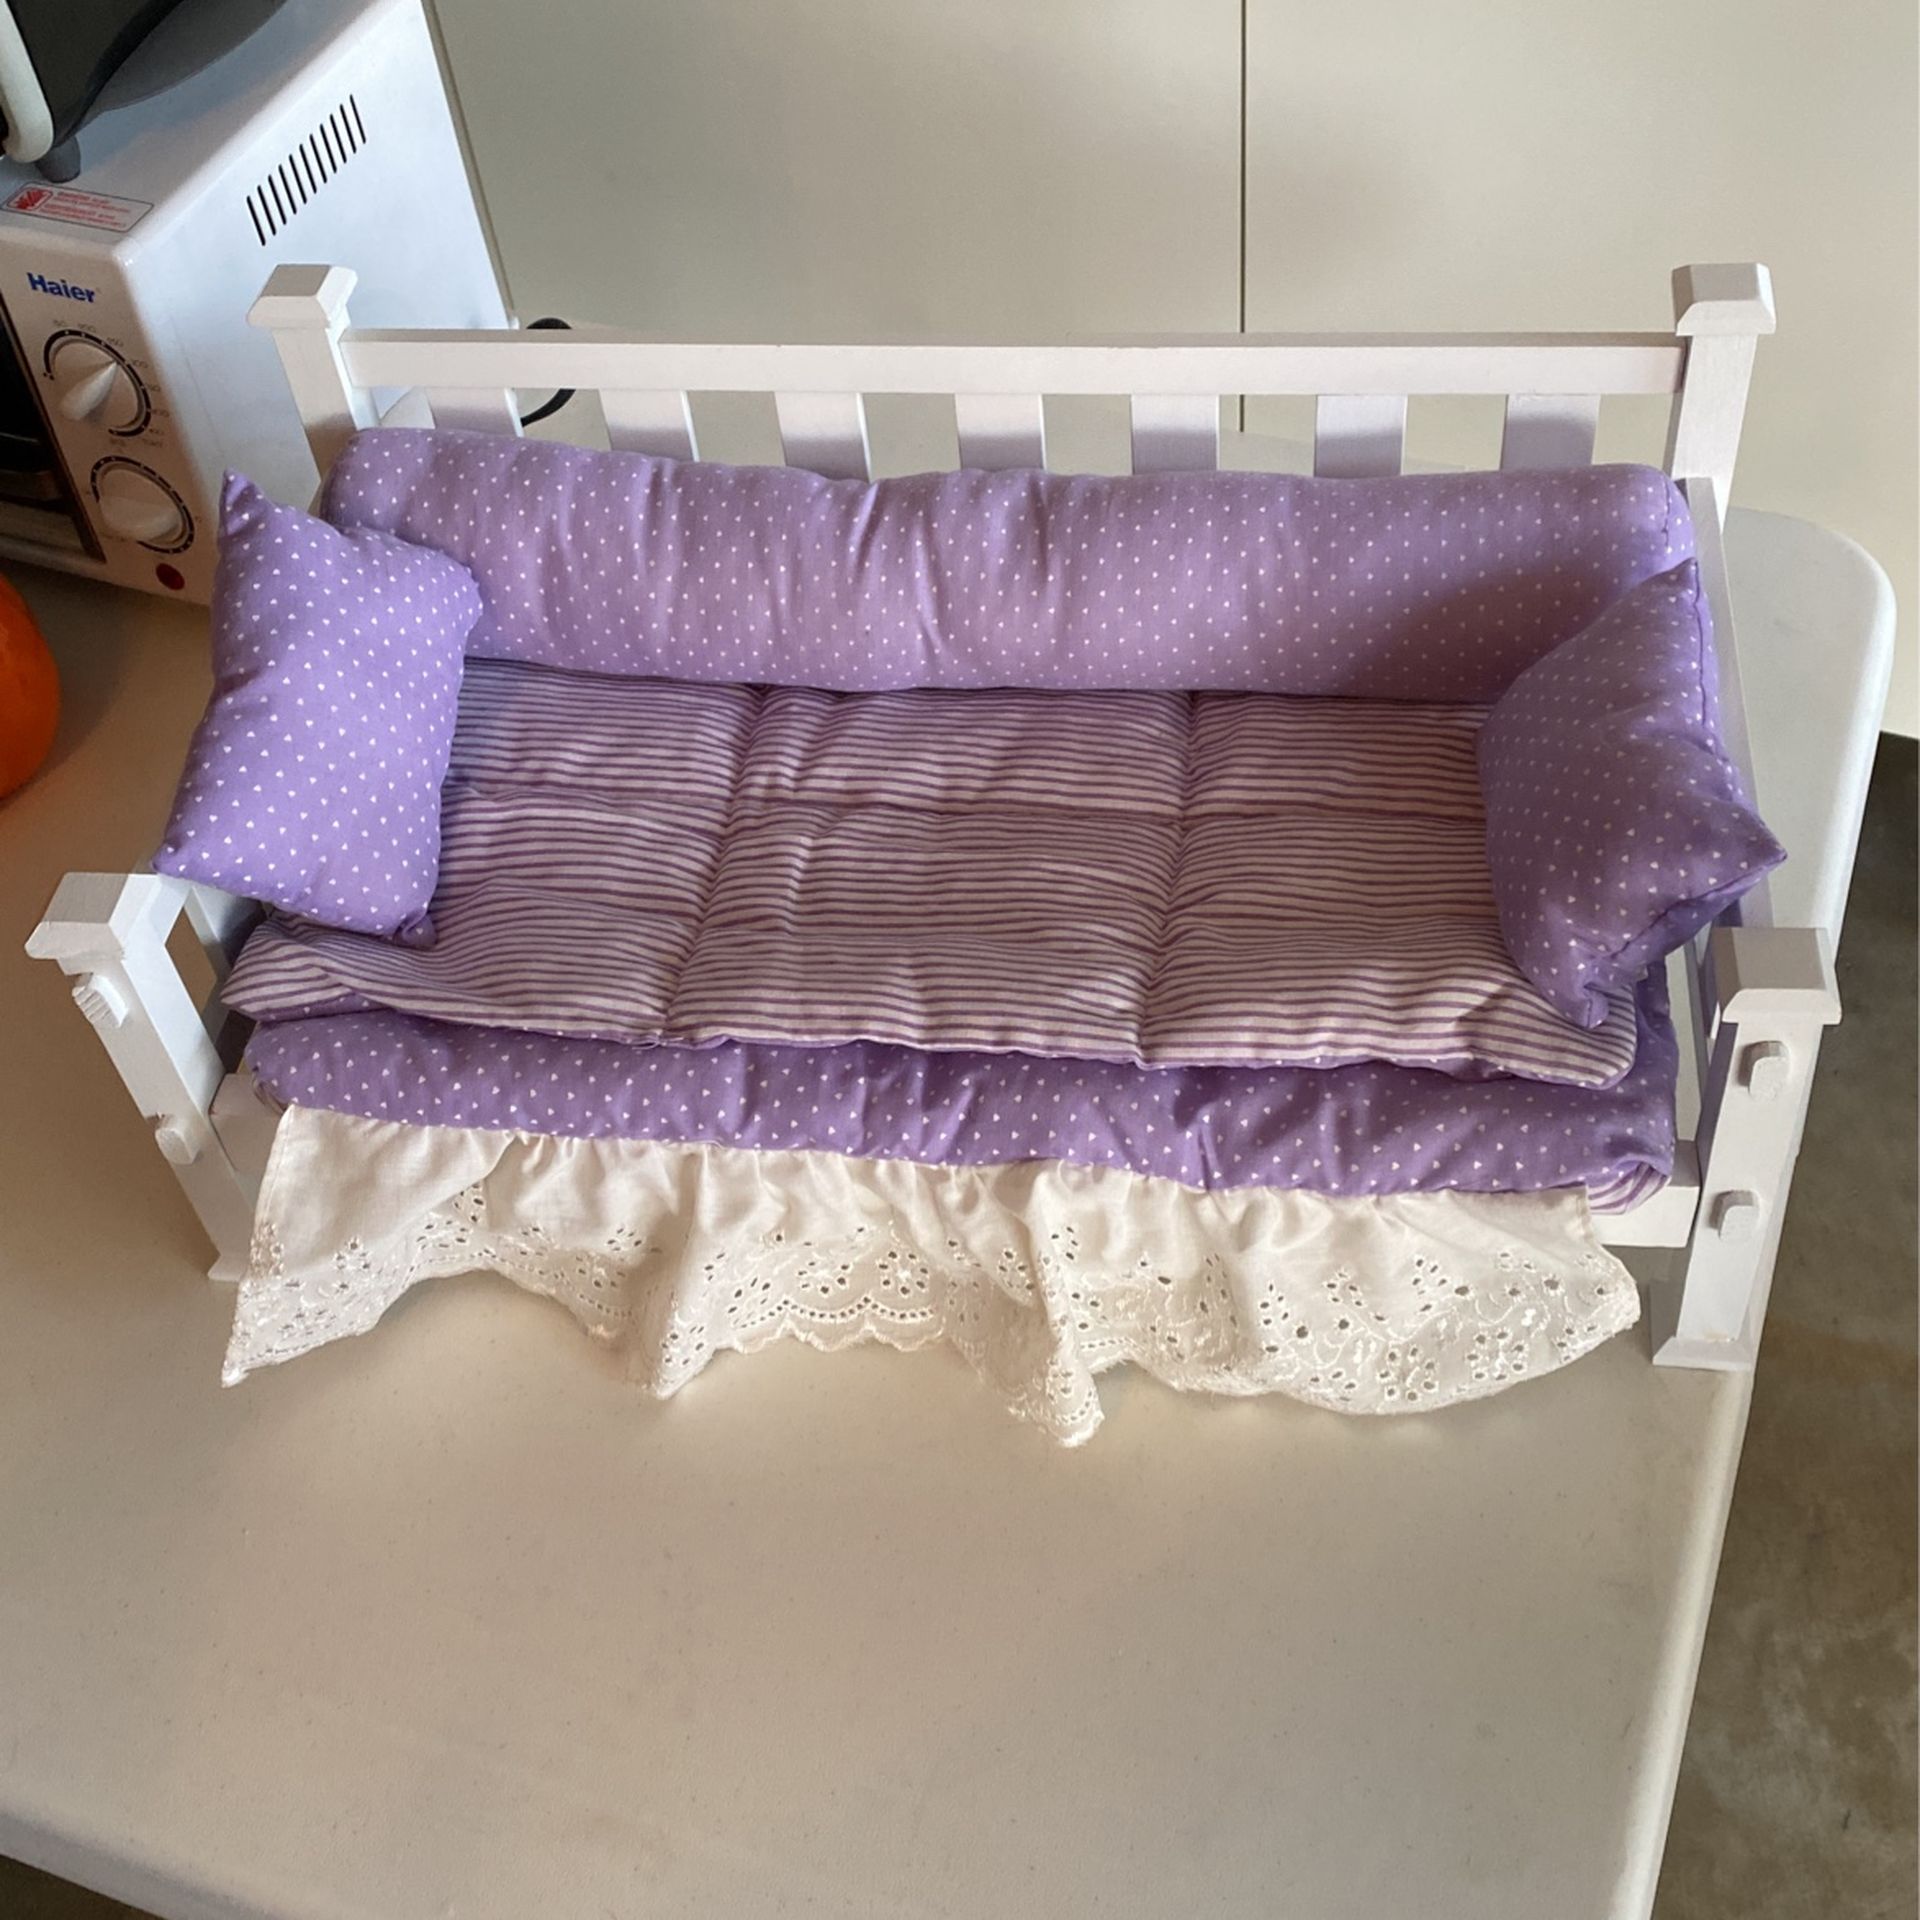 Doll's Sofabed Toy